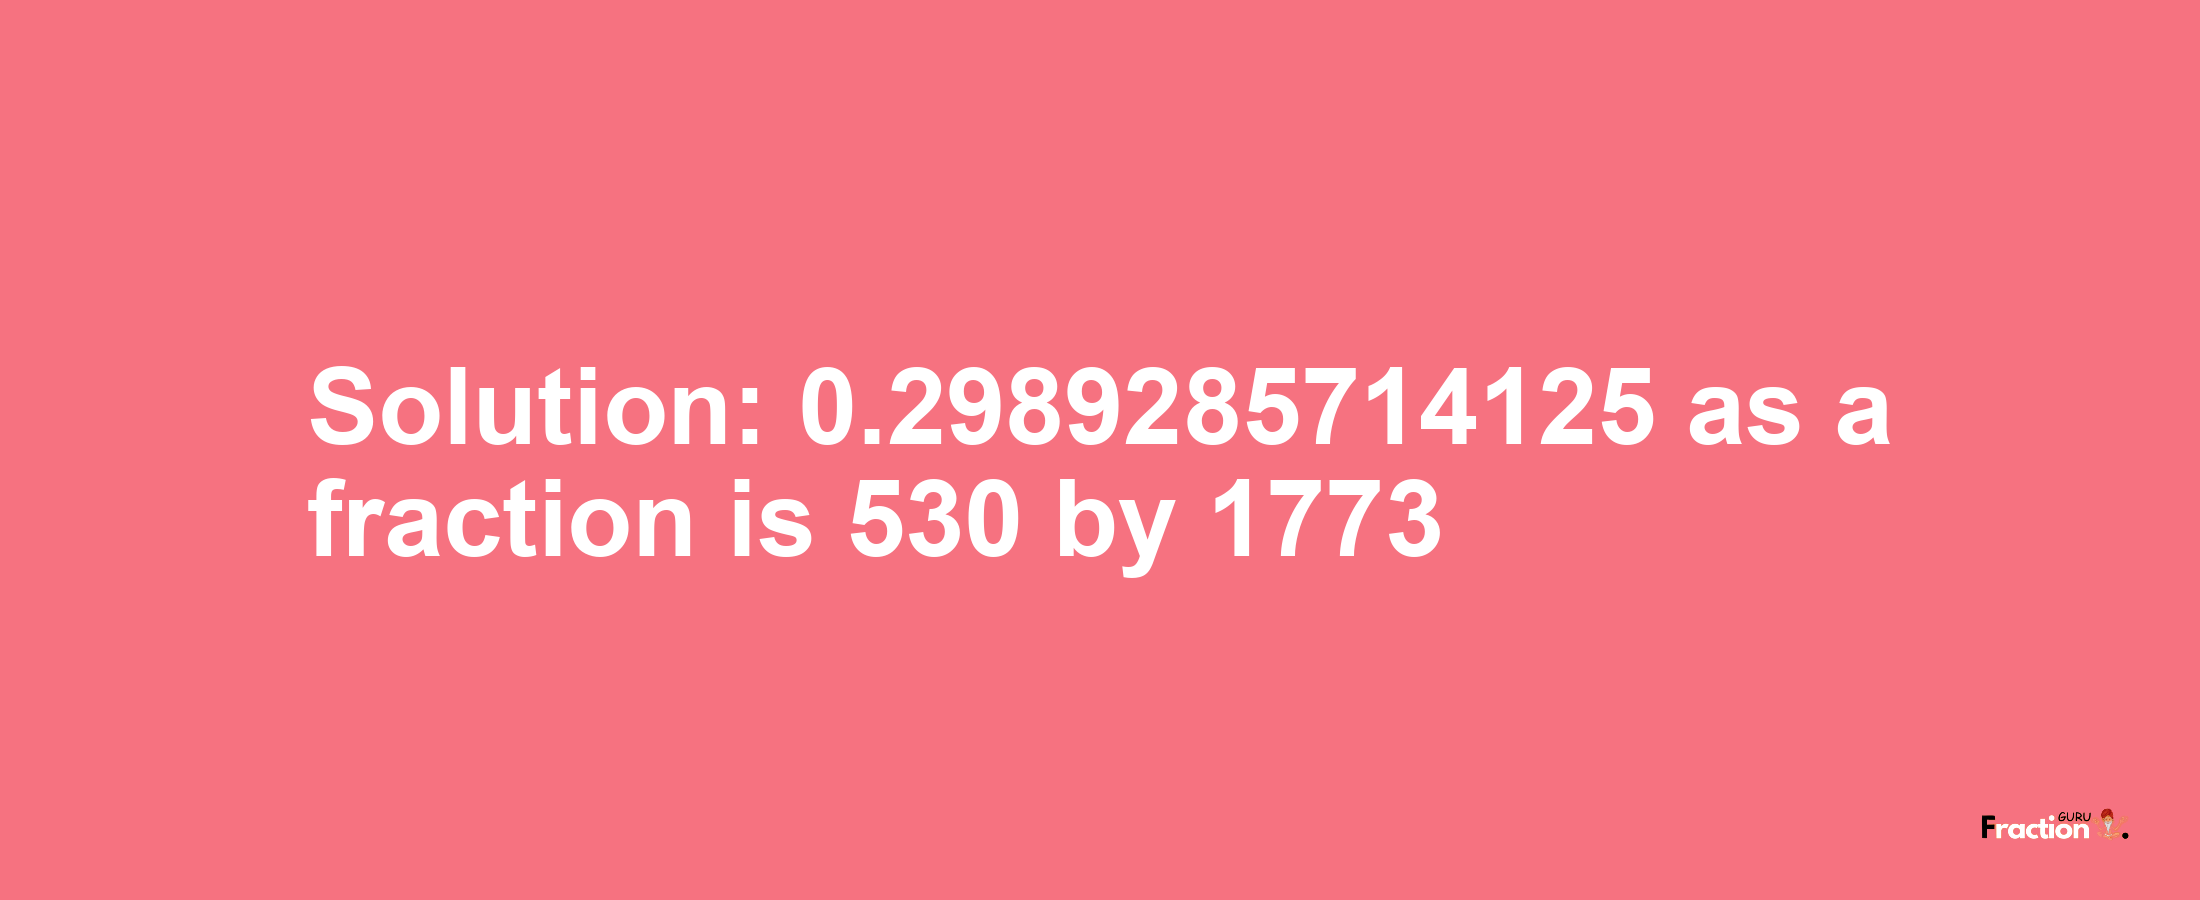 Solution:0.2989285714125 as a fraction is 530/1773